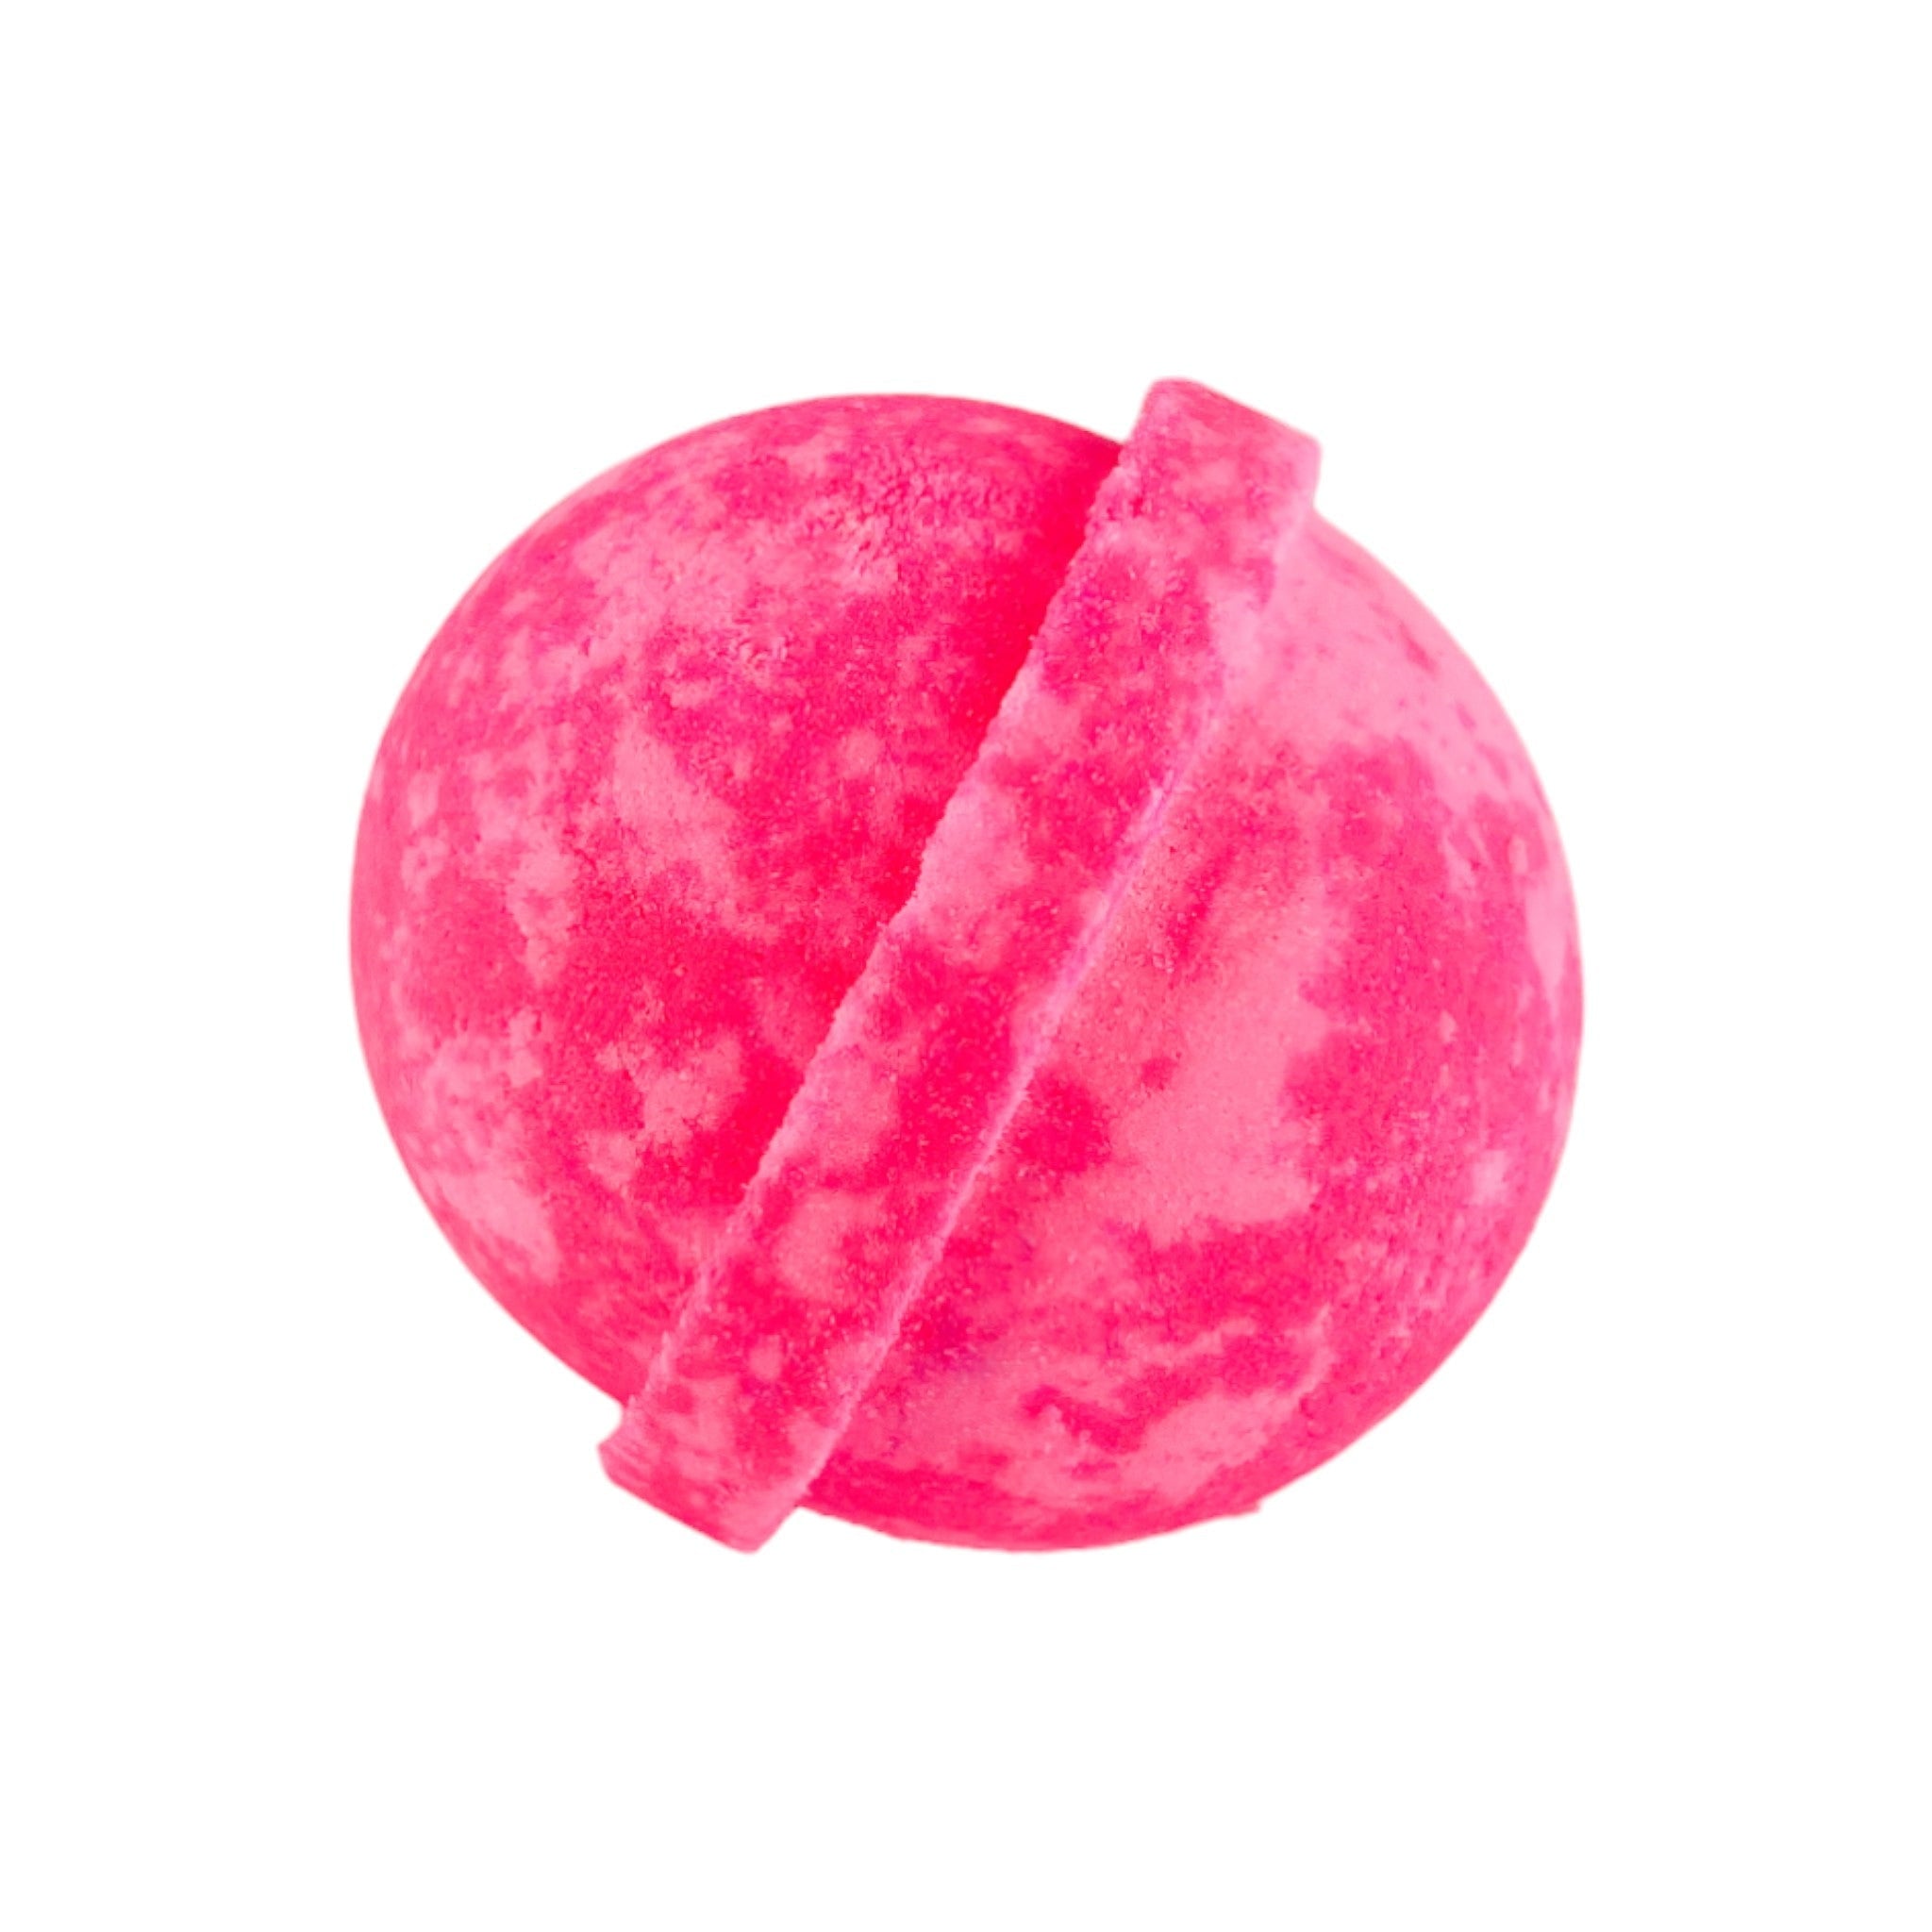 Pink Lotus Blossom Bath Bomb -Large - Old Town Soap Co.